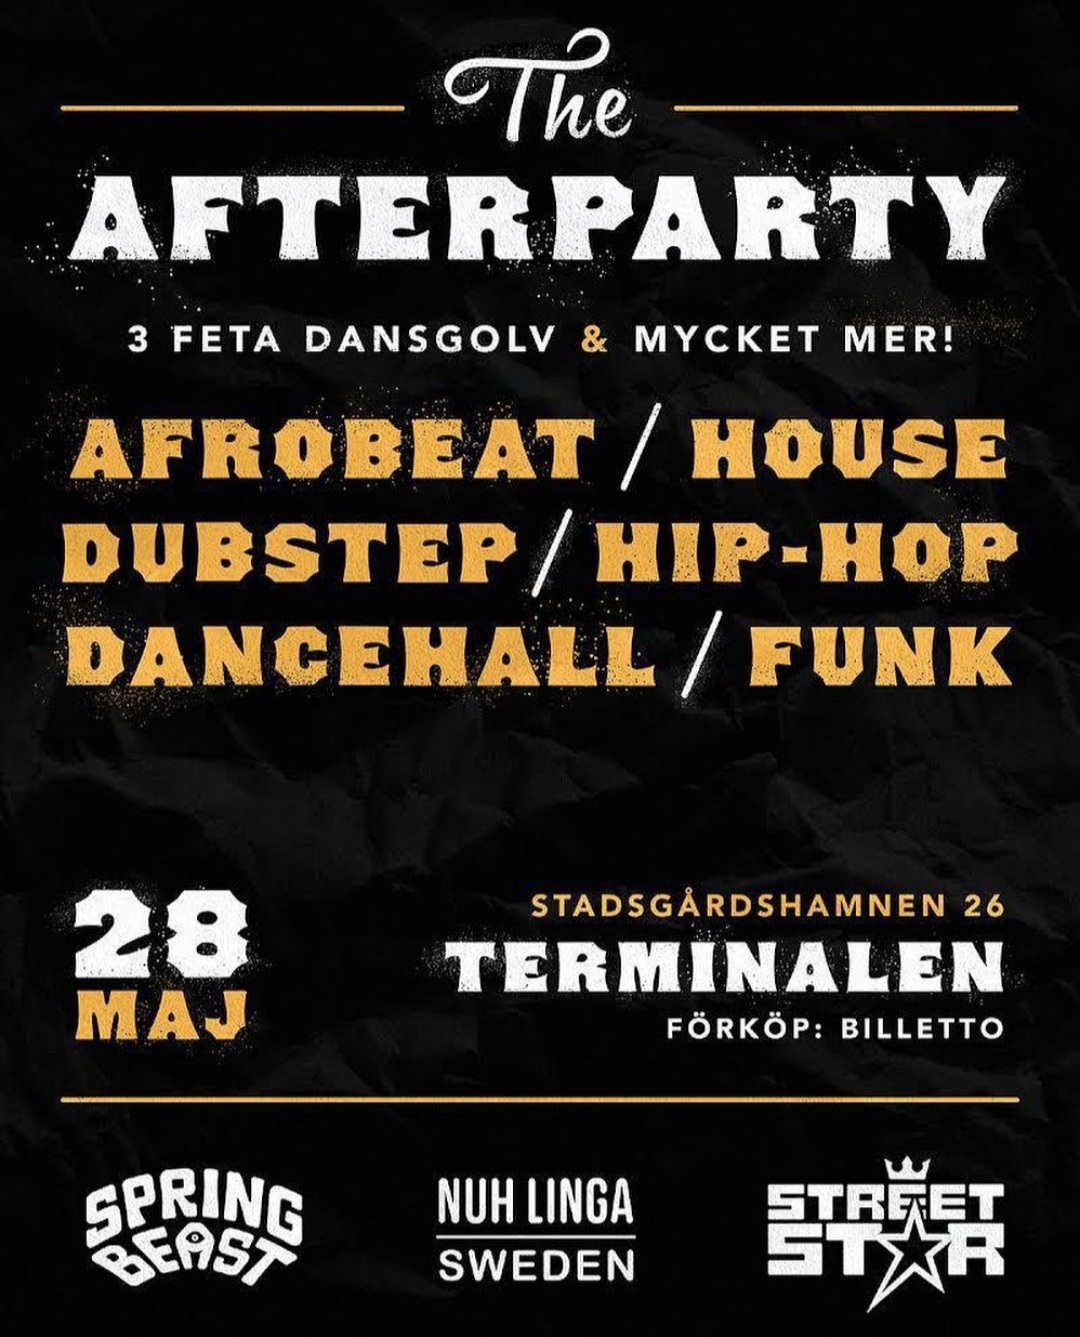 KLUBB! STREET STAR FESTIVAL - The Afterparty!